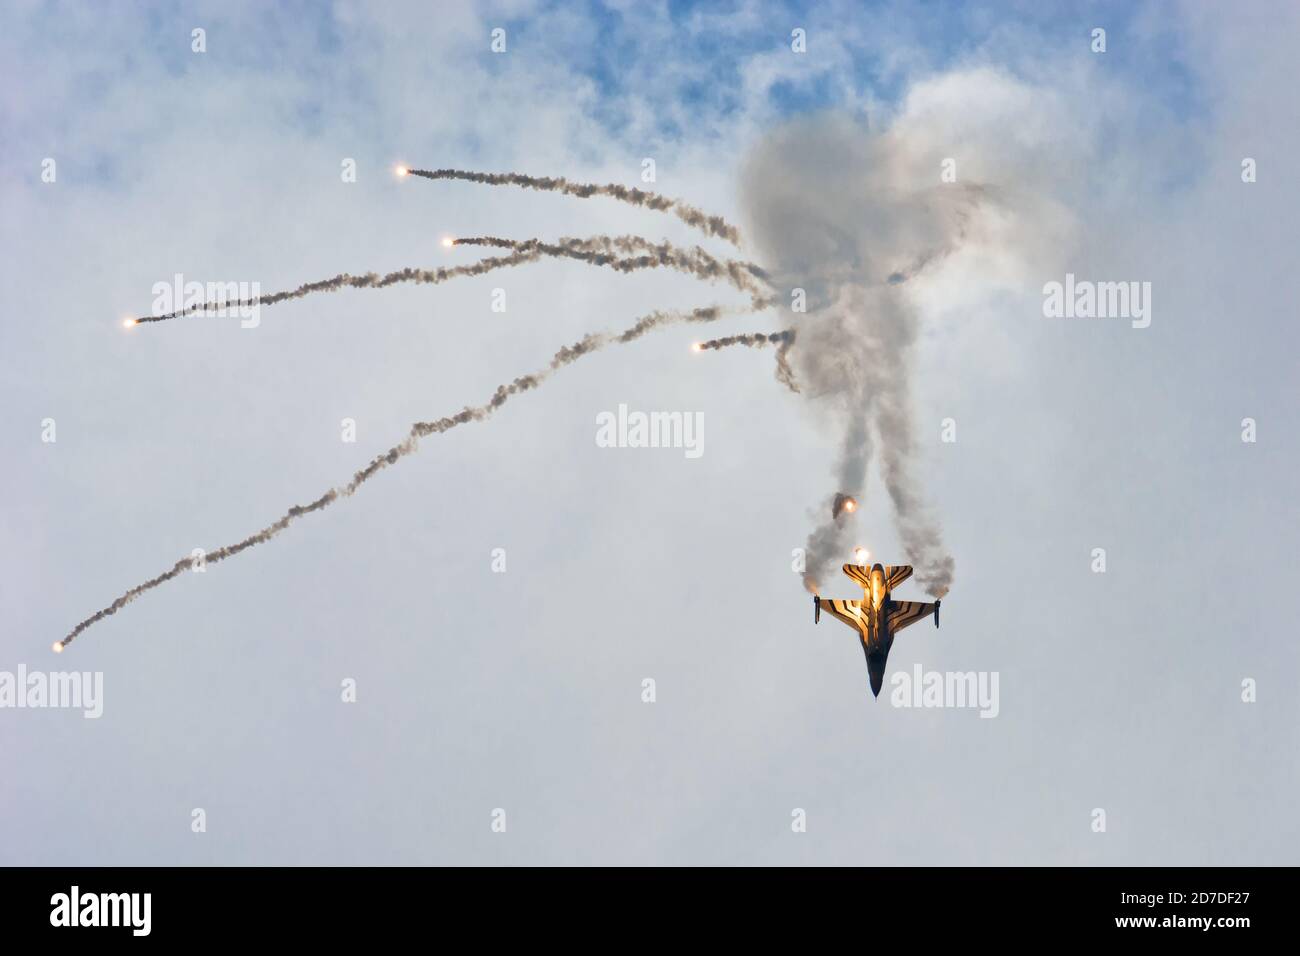 Belgian military F-16 Dark Falcon flying with afterburner and smoke releasing flares on at Radom Airshow 2015 Stock Photo